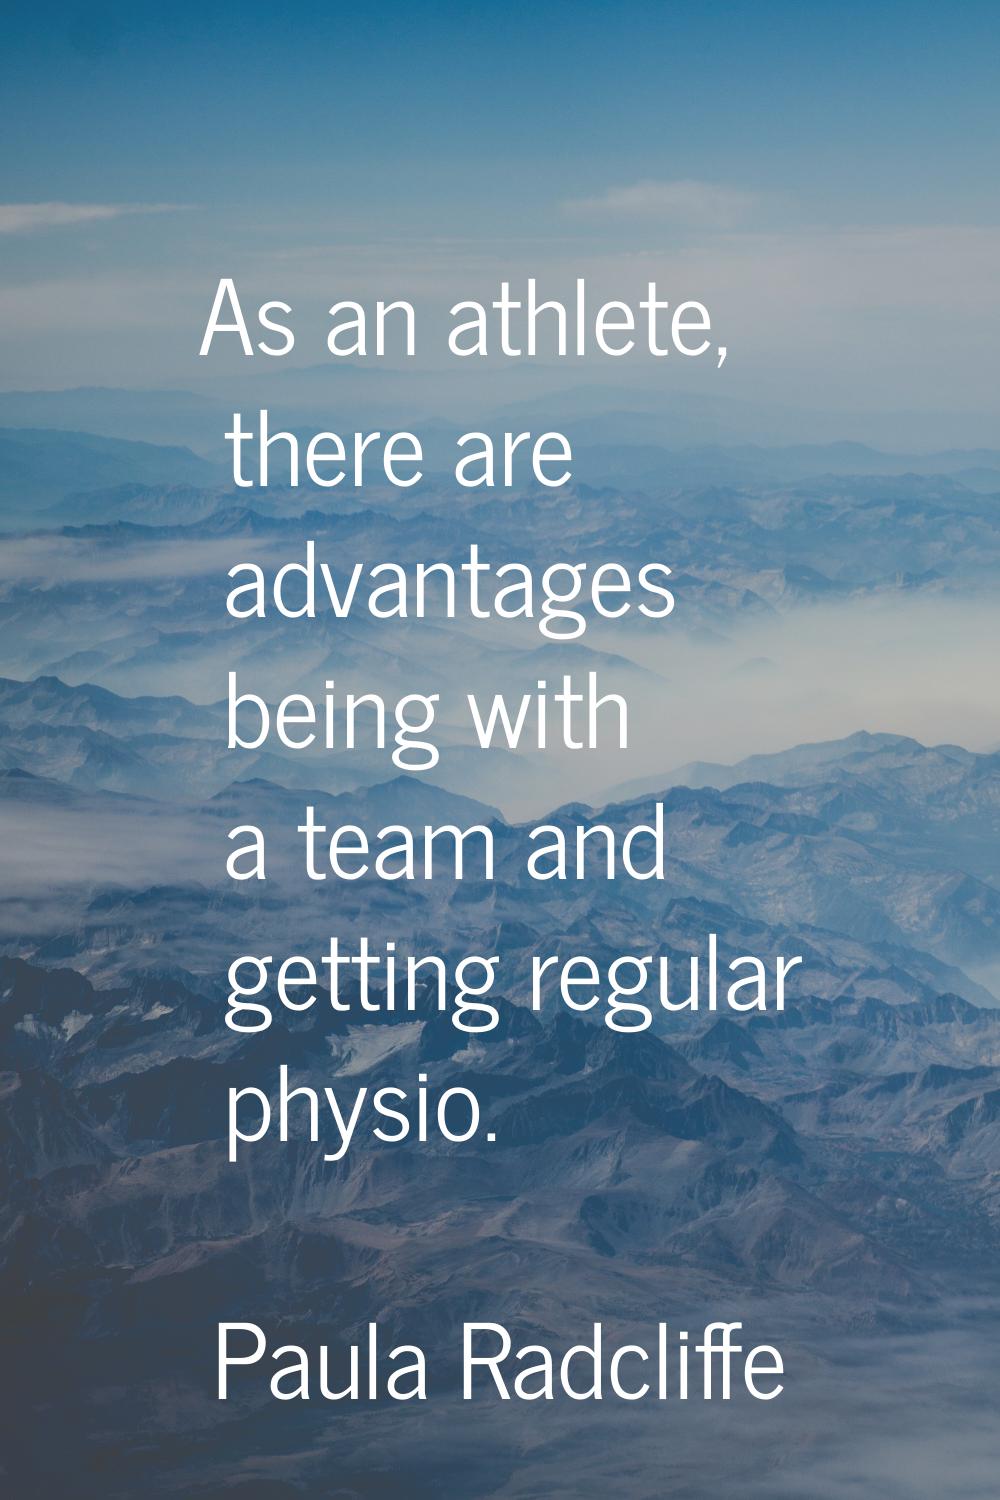 As an athlete, there are advantages being with a team and getting regular physio.